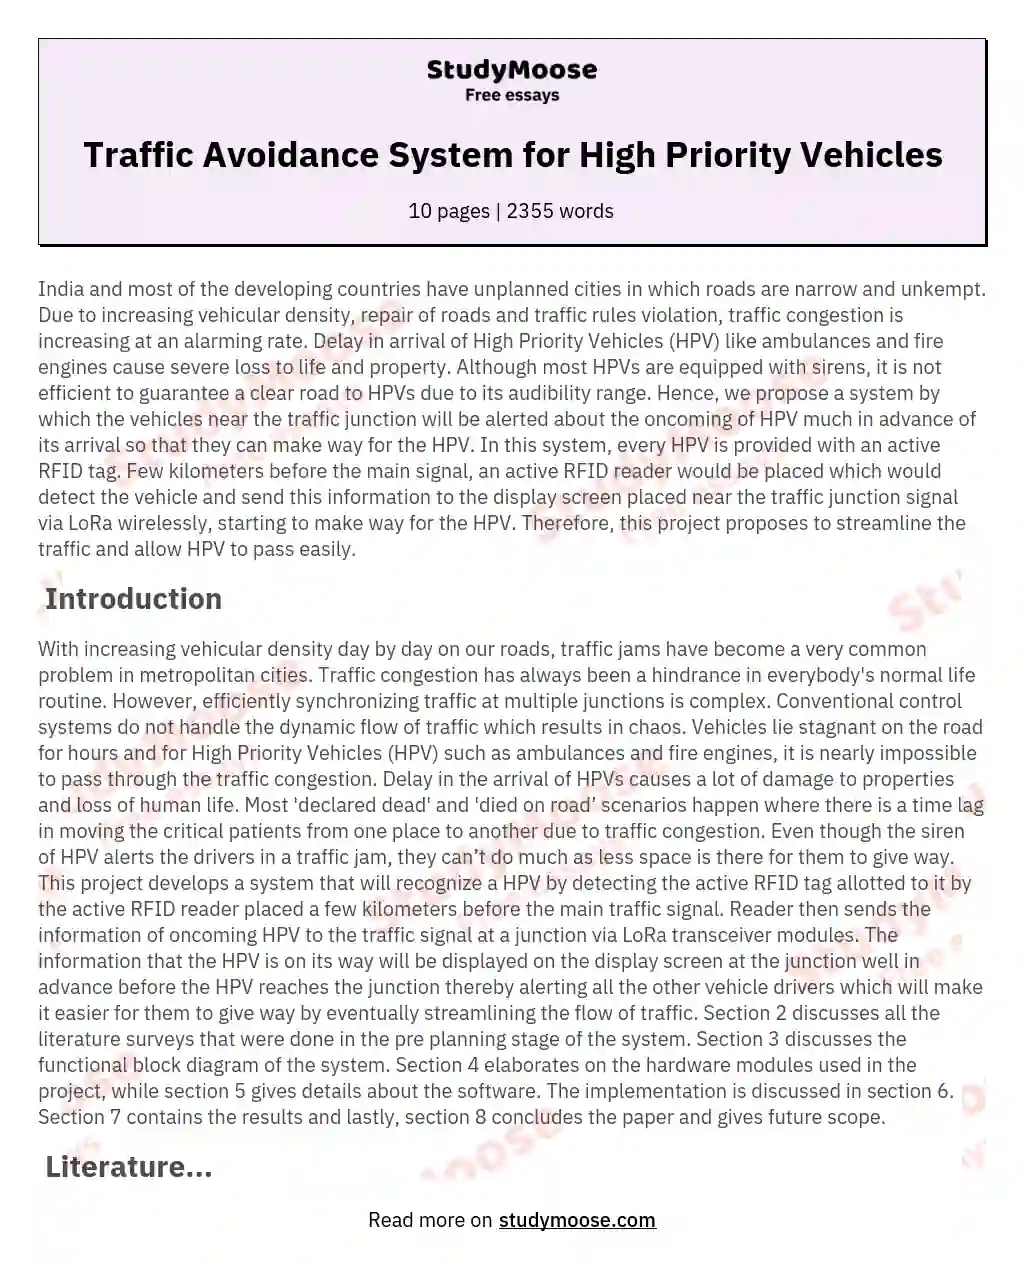 Traffic Avoidance System for High Priority Vehicles essay